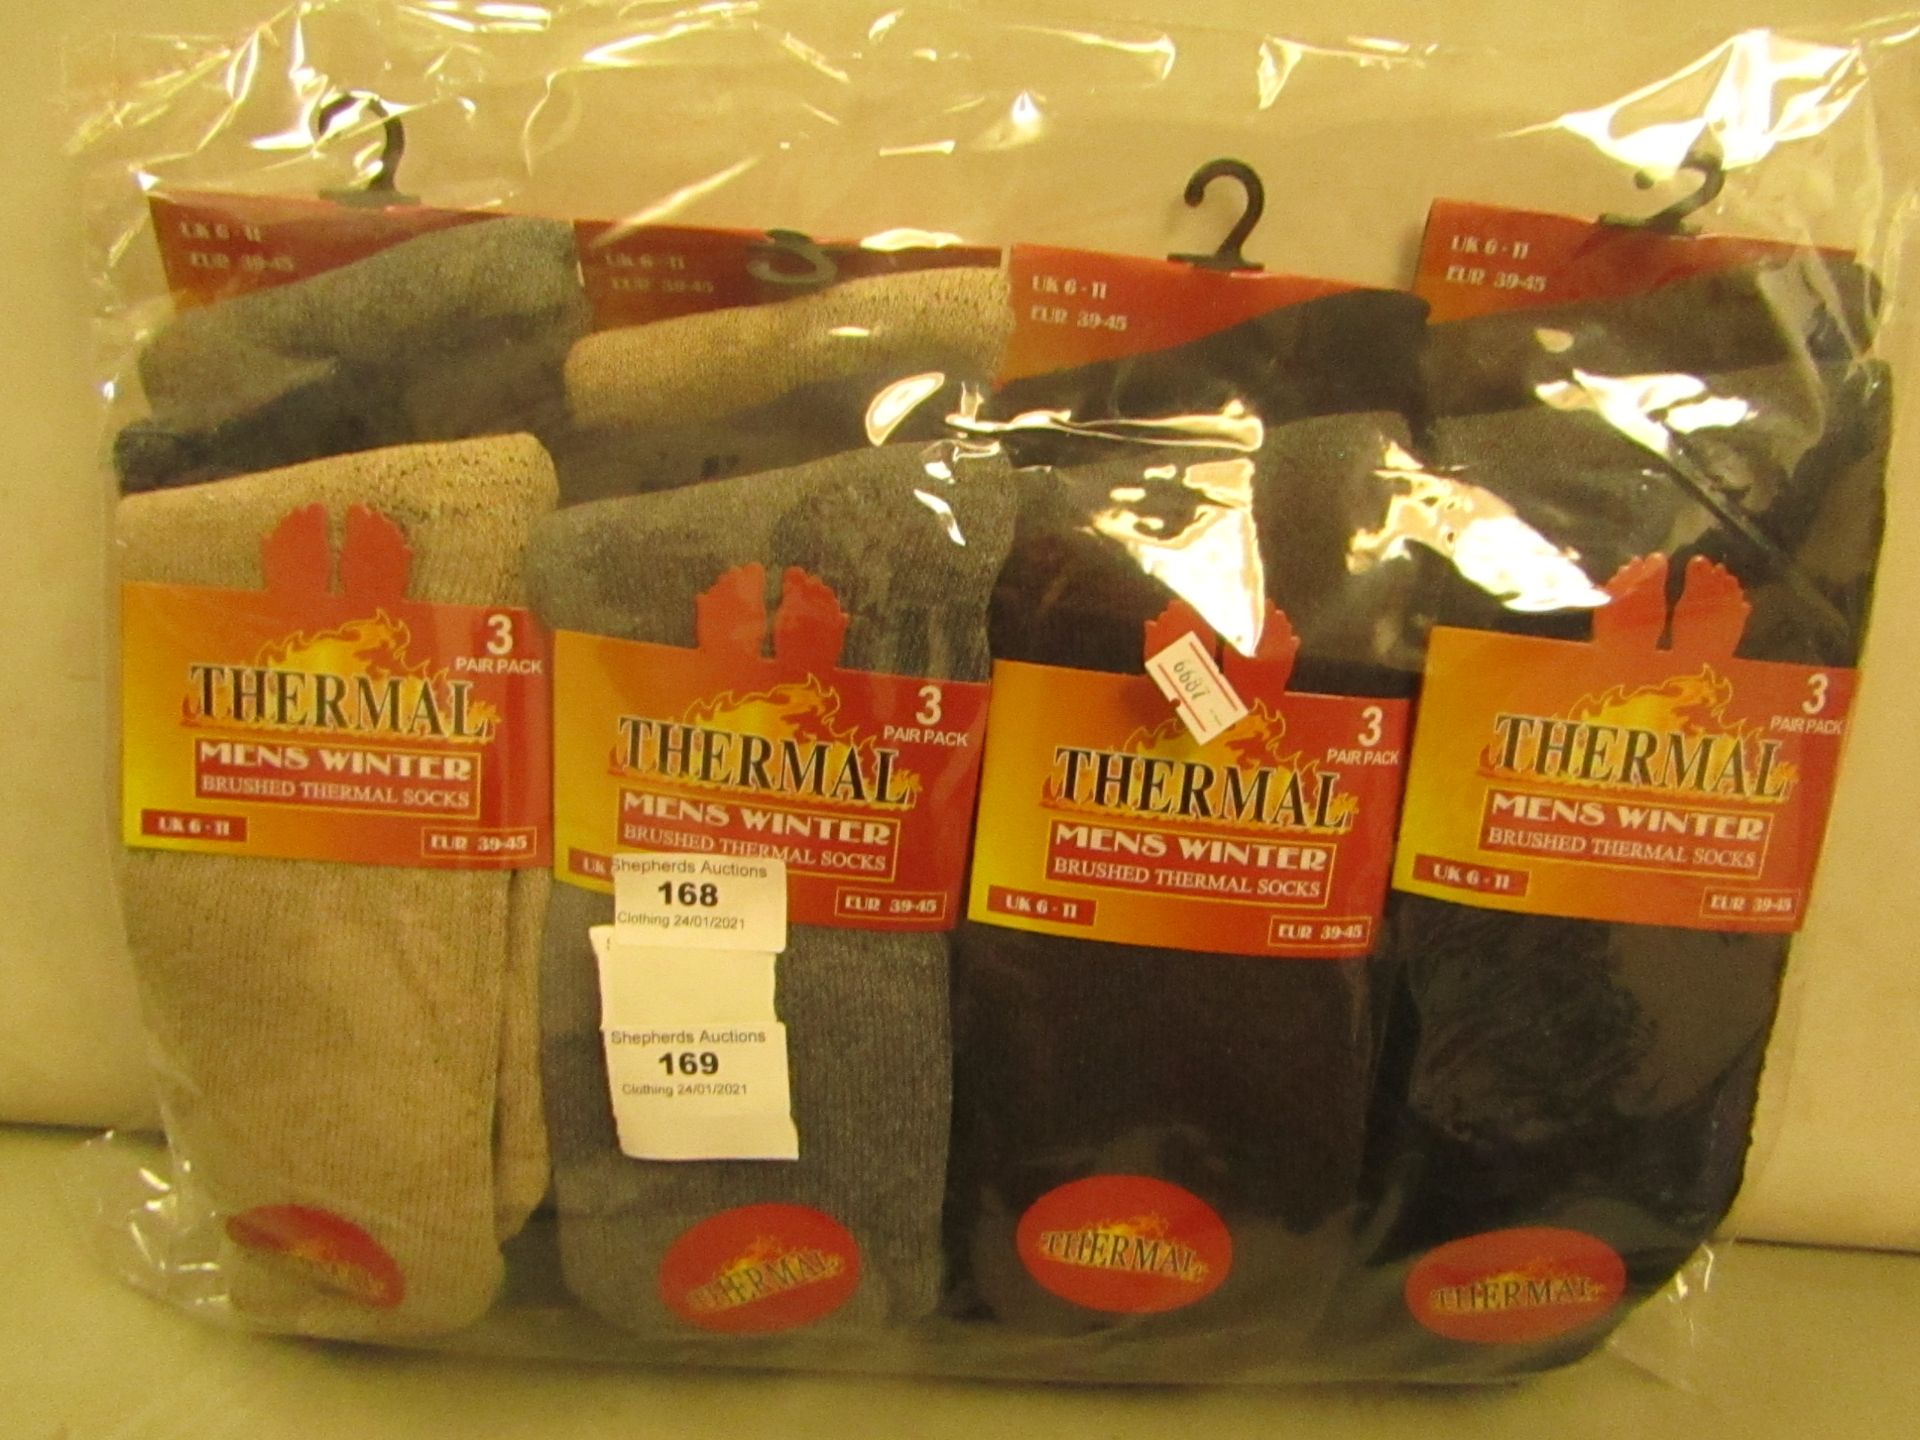 12 X Pairs of Mens Winter Thermal Socks Size 6-11 New & Packaged